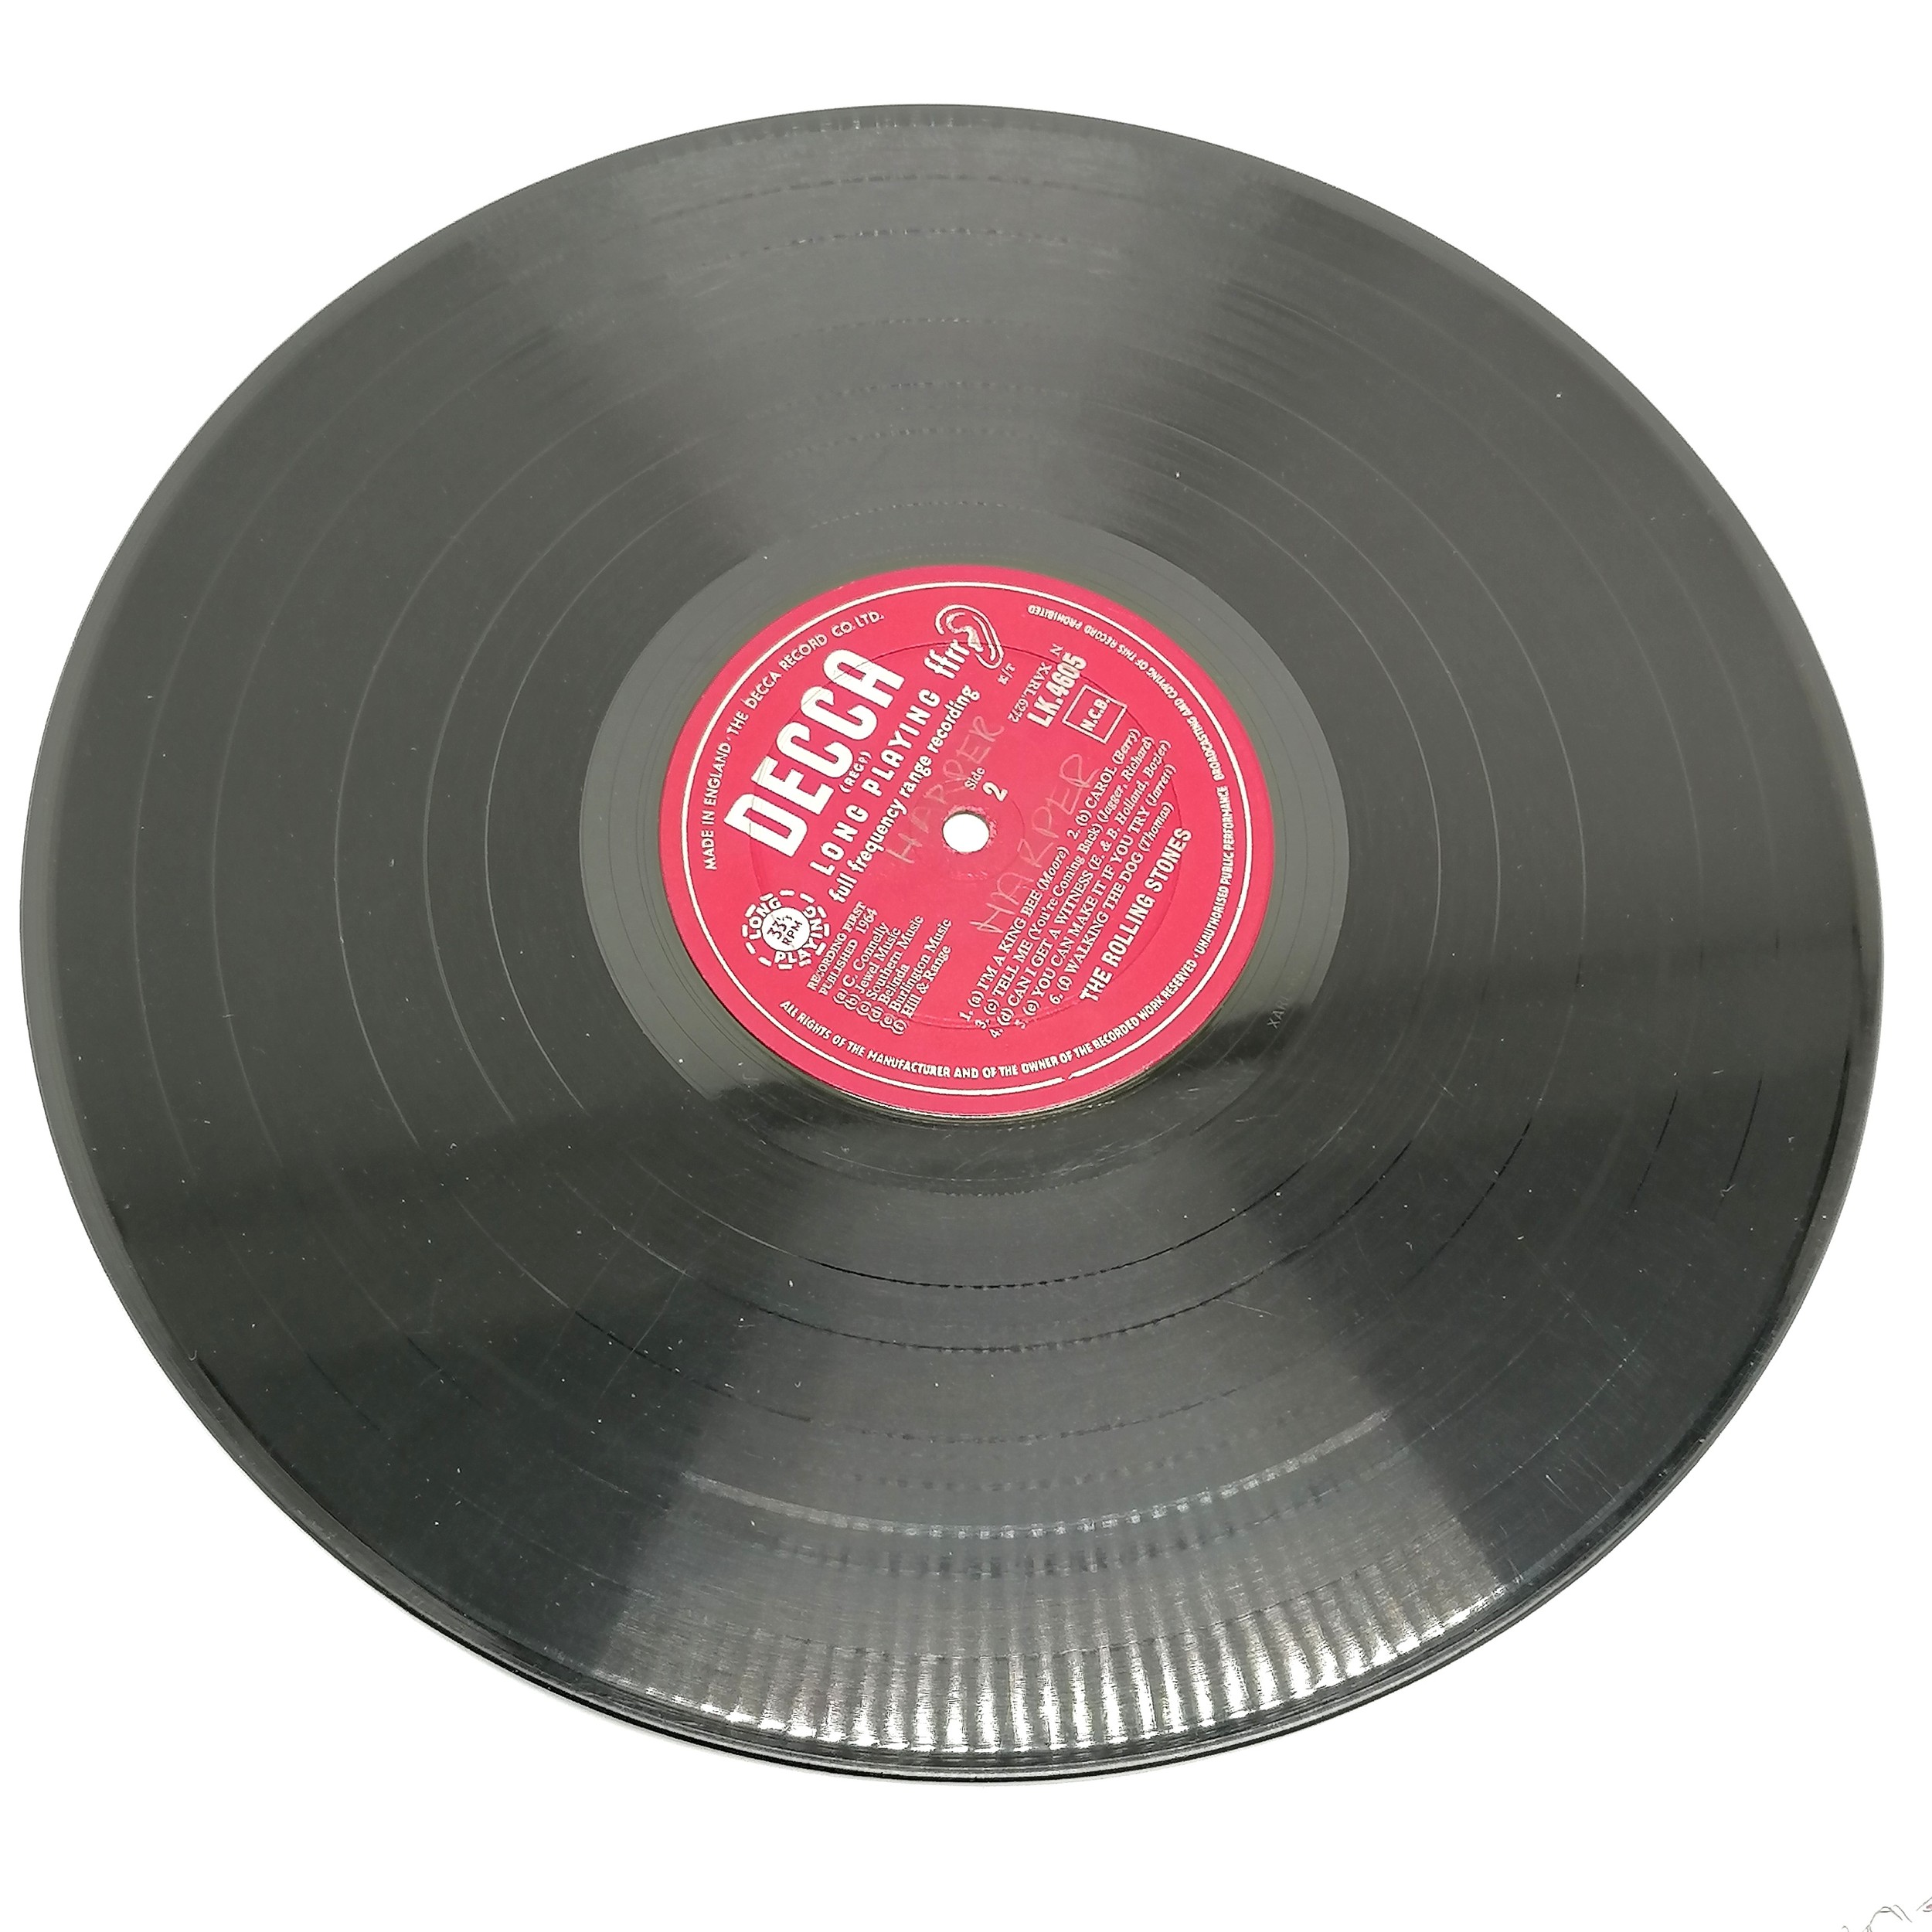 First album (1964) of the Rolling Stones by Decca MONO LK 4605 ~ the vinyl has a red/silver Decca ' - Image 4 of 4